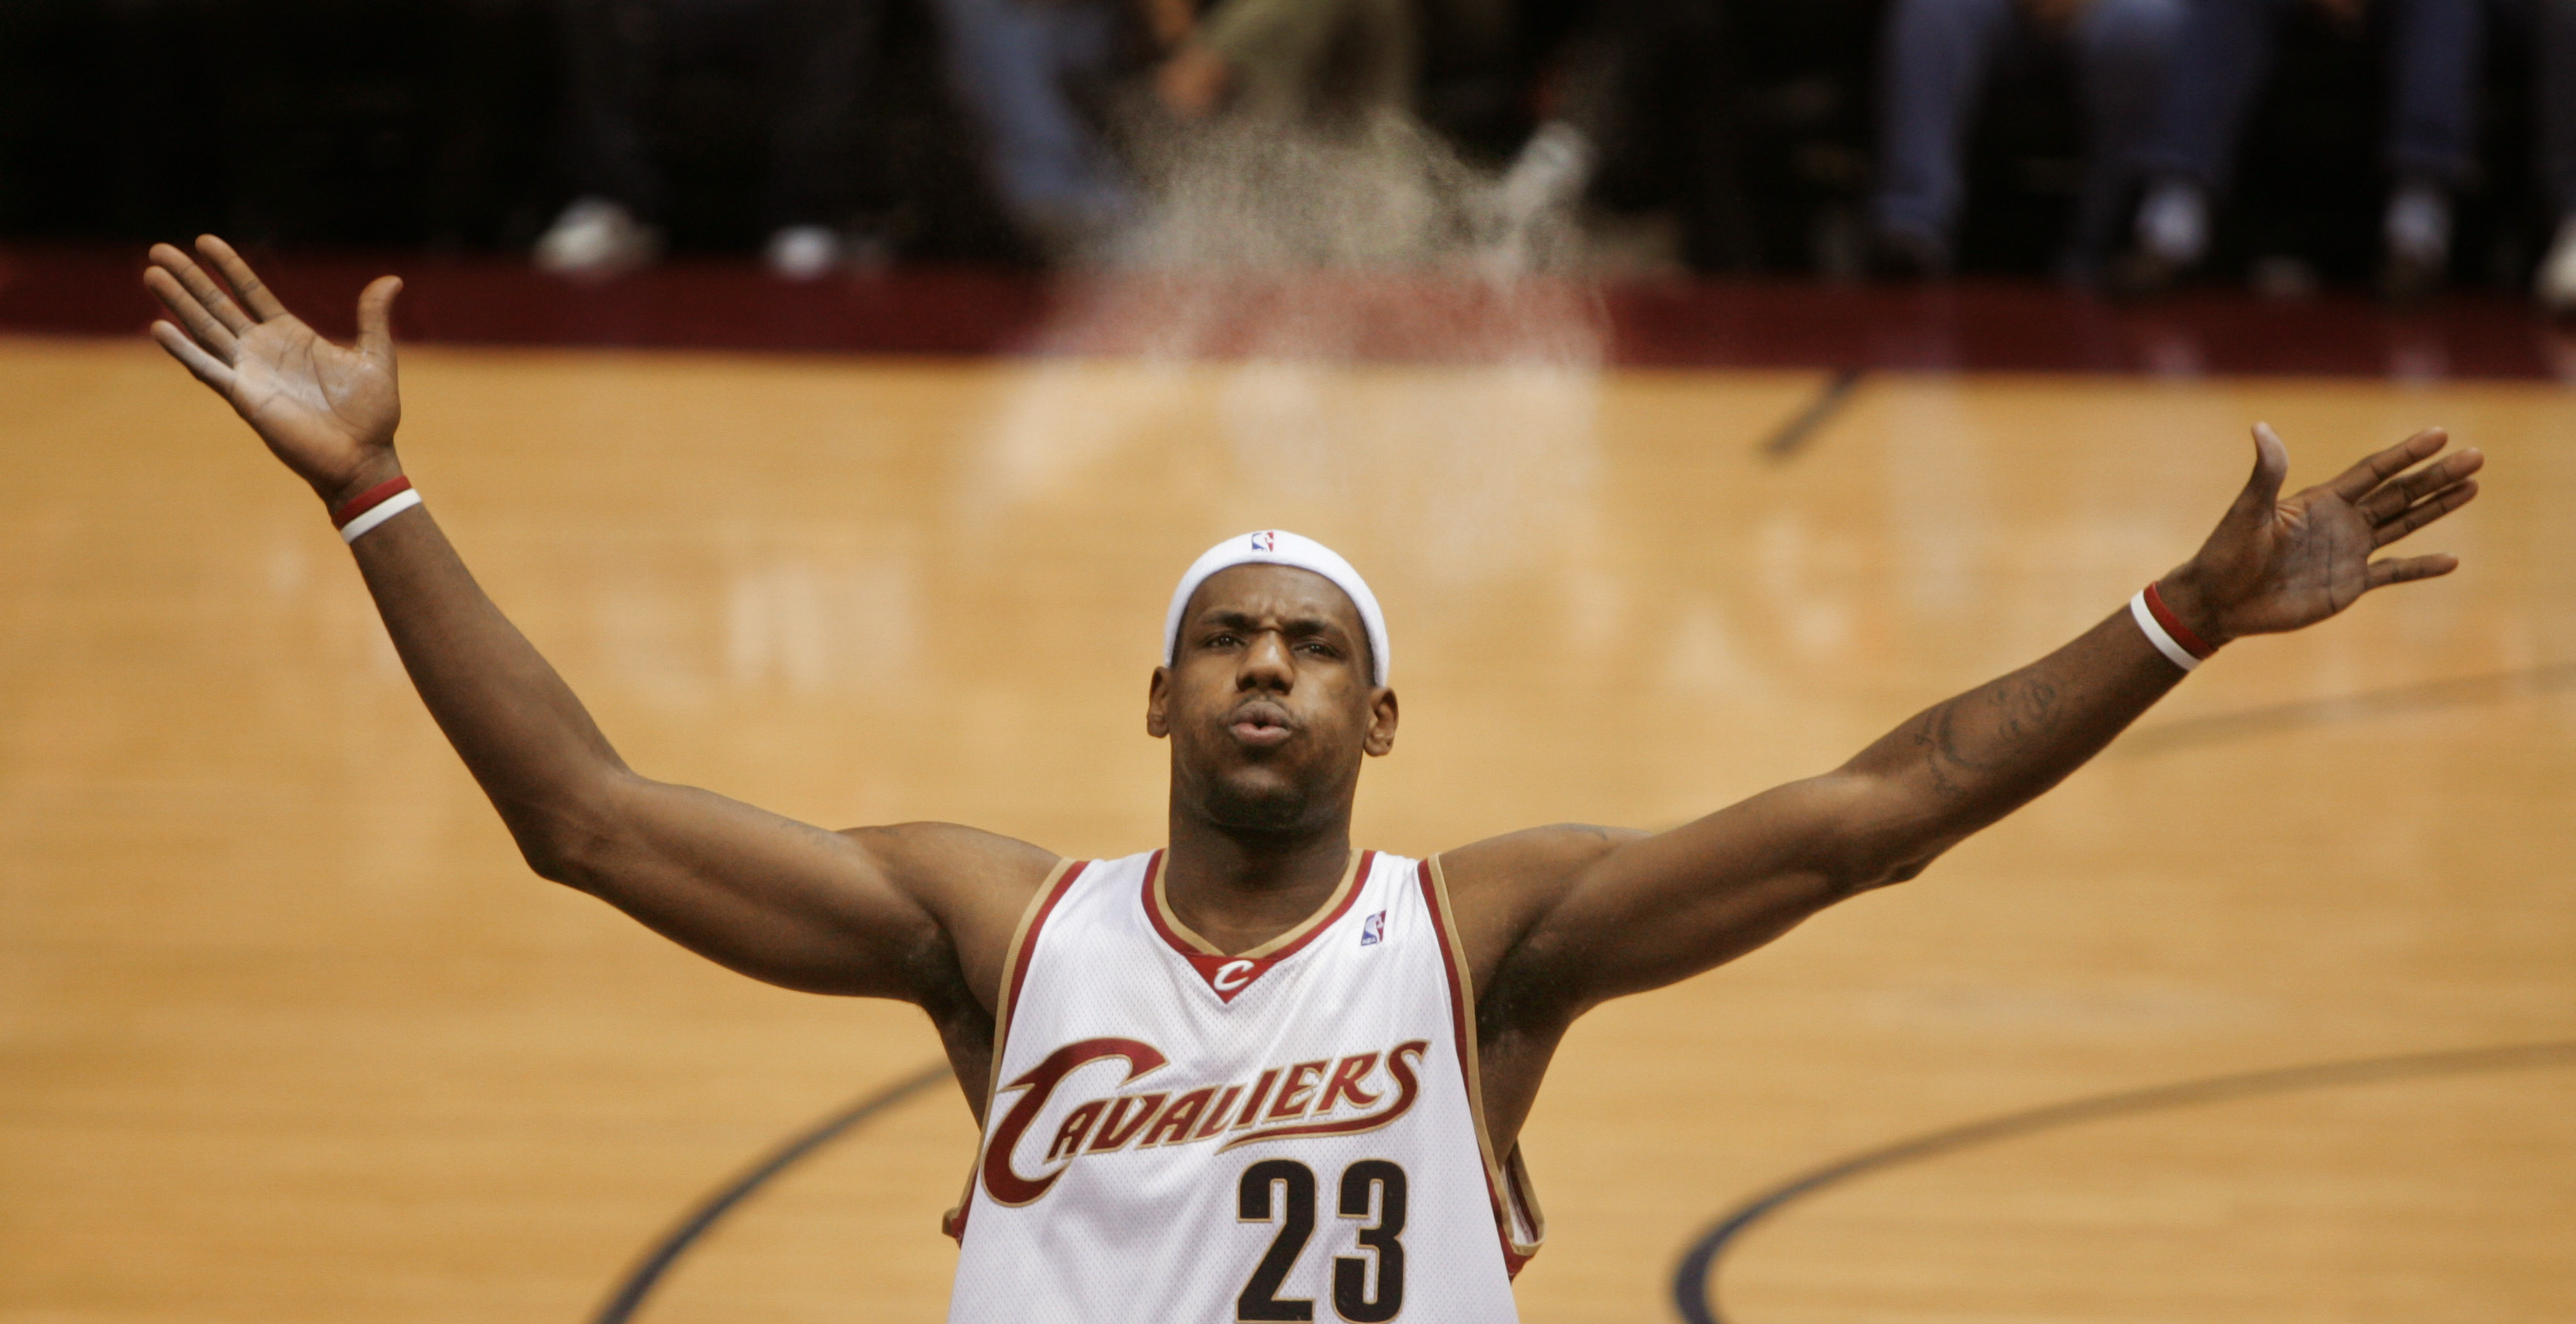 The Cleveland Cavaliers LeBron James sends talc powder in the air as he blows it away from his face before a game against the Orlando Magic February 21, 2006 at Quicken Loans Arena.  The powder blast is a pre-game ritual for LeBron and the first row of media usually gets some of the residue.   (John Kuntz/The Plain Dealer) 